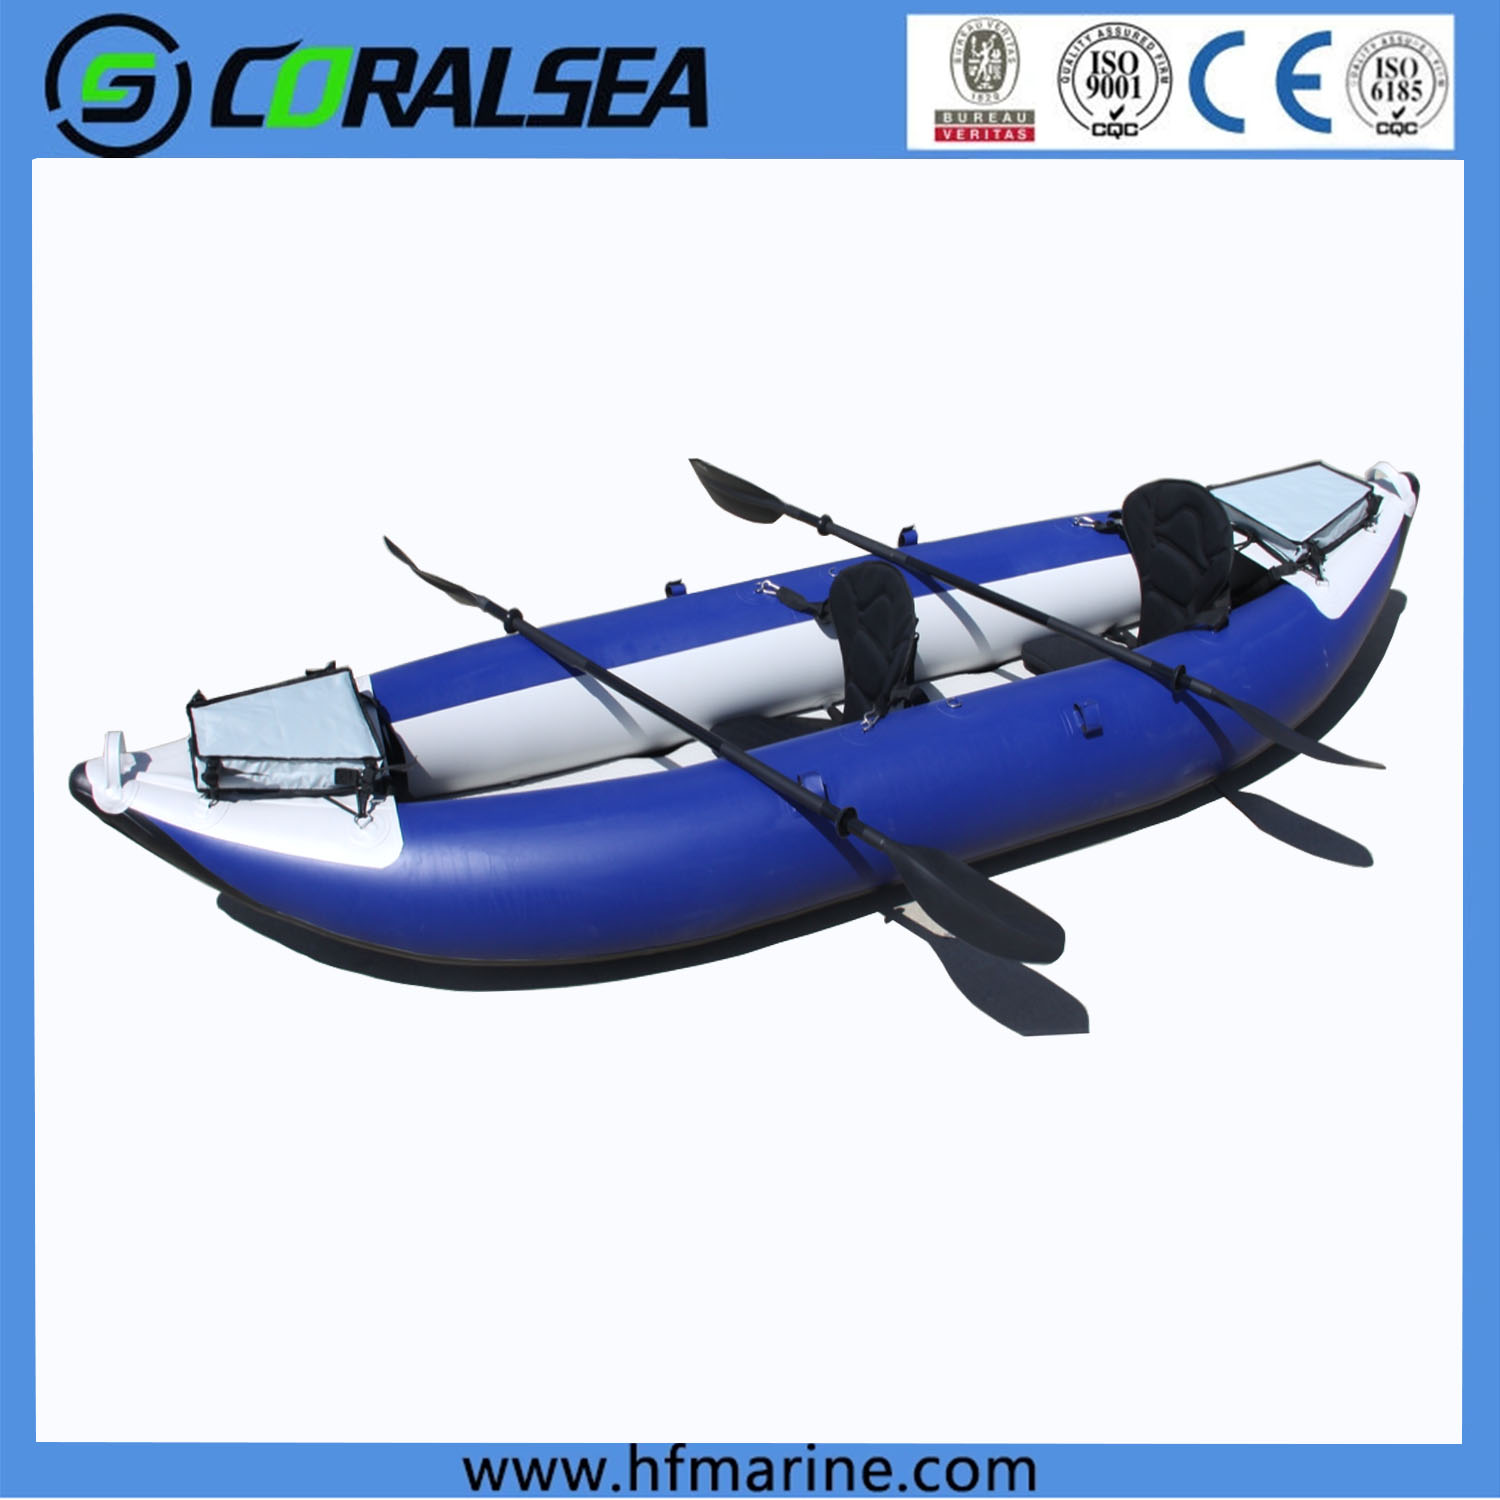 Wholesale Wholesale Inflatable Pedal Boat Supplier – Tandem inflatable  fishing kayak white water explorer – CORALSEA Manufacturer and Supplier